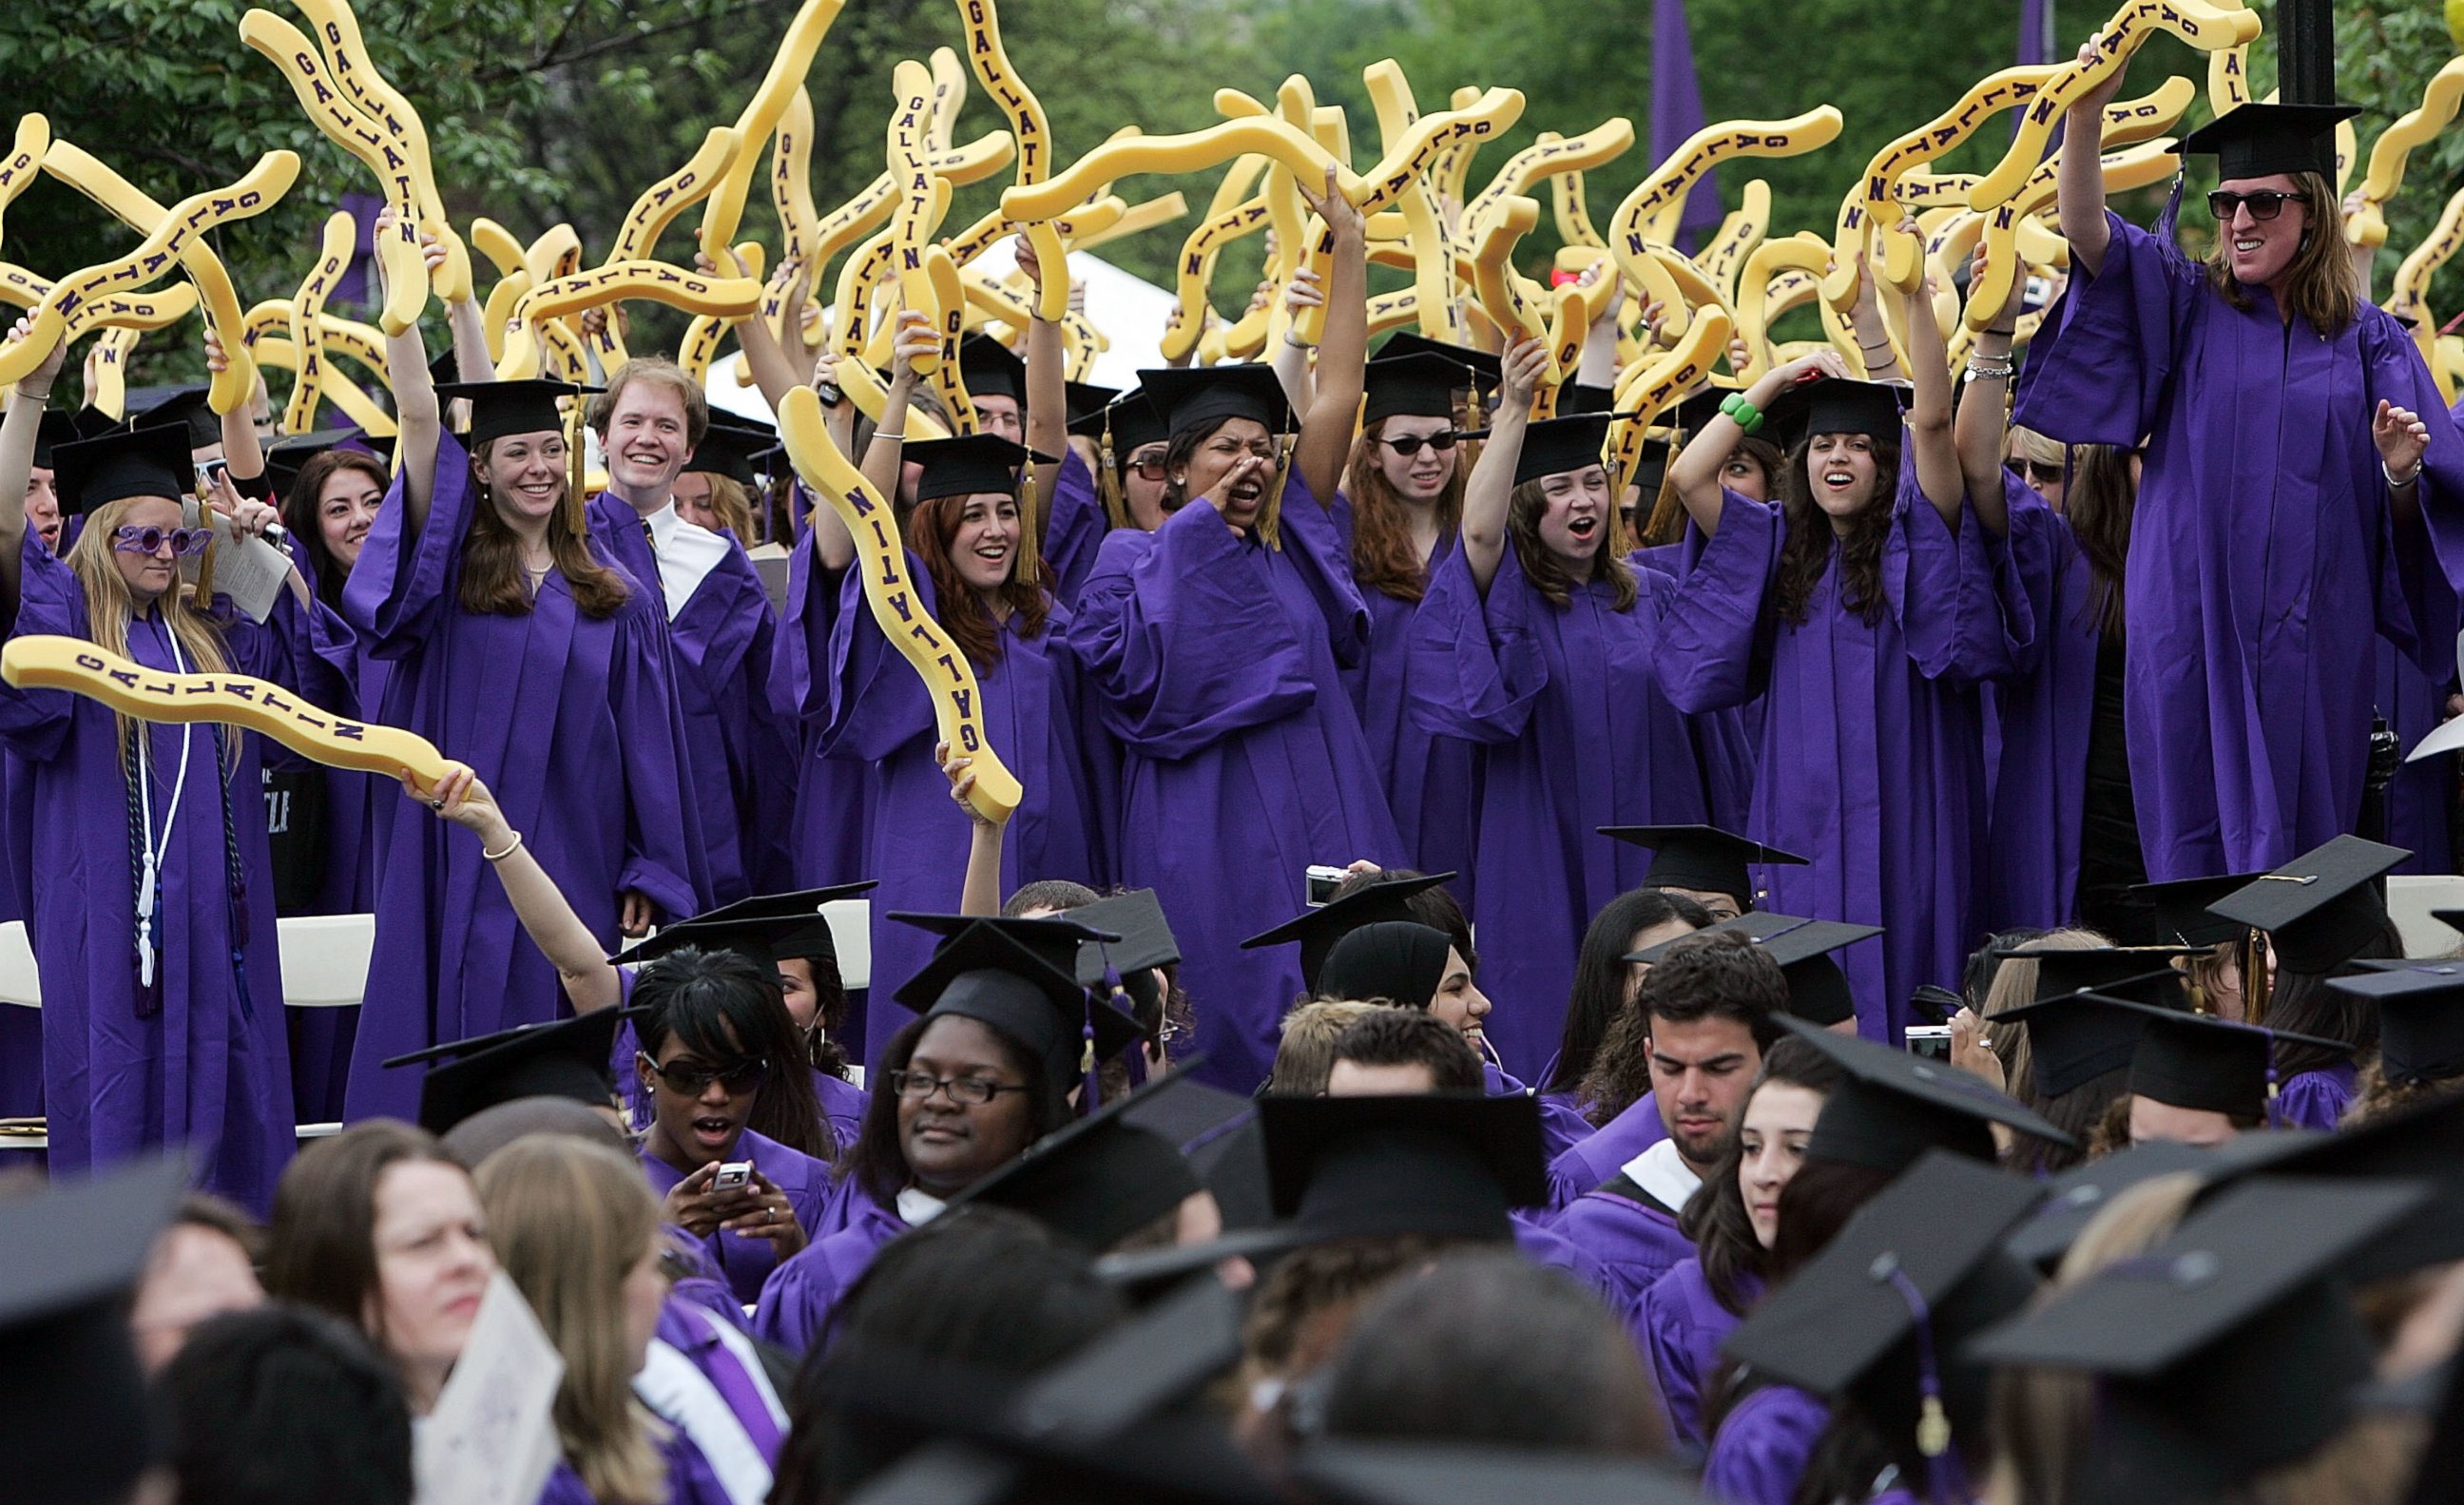 PHOTO: New York University graduates celebrate during commencement ceremonies in Washington Square Park on May 10, 2007 in New York City. 